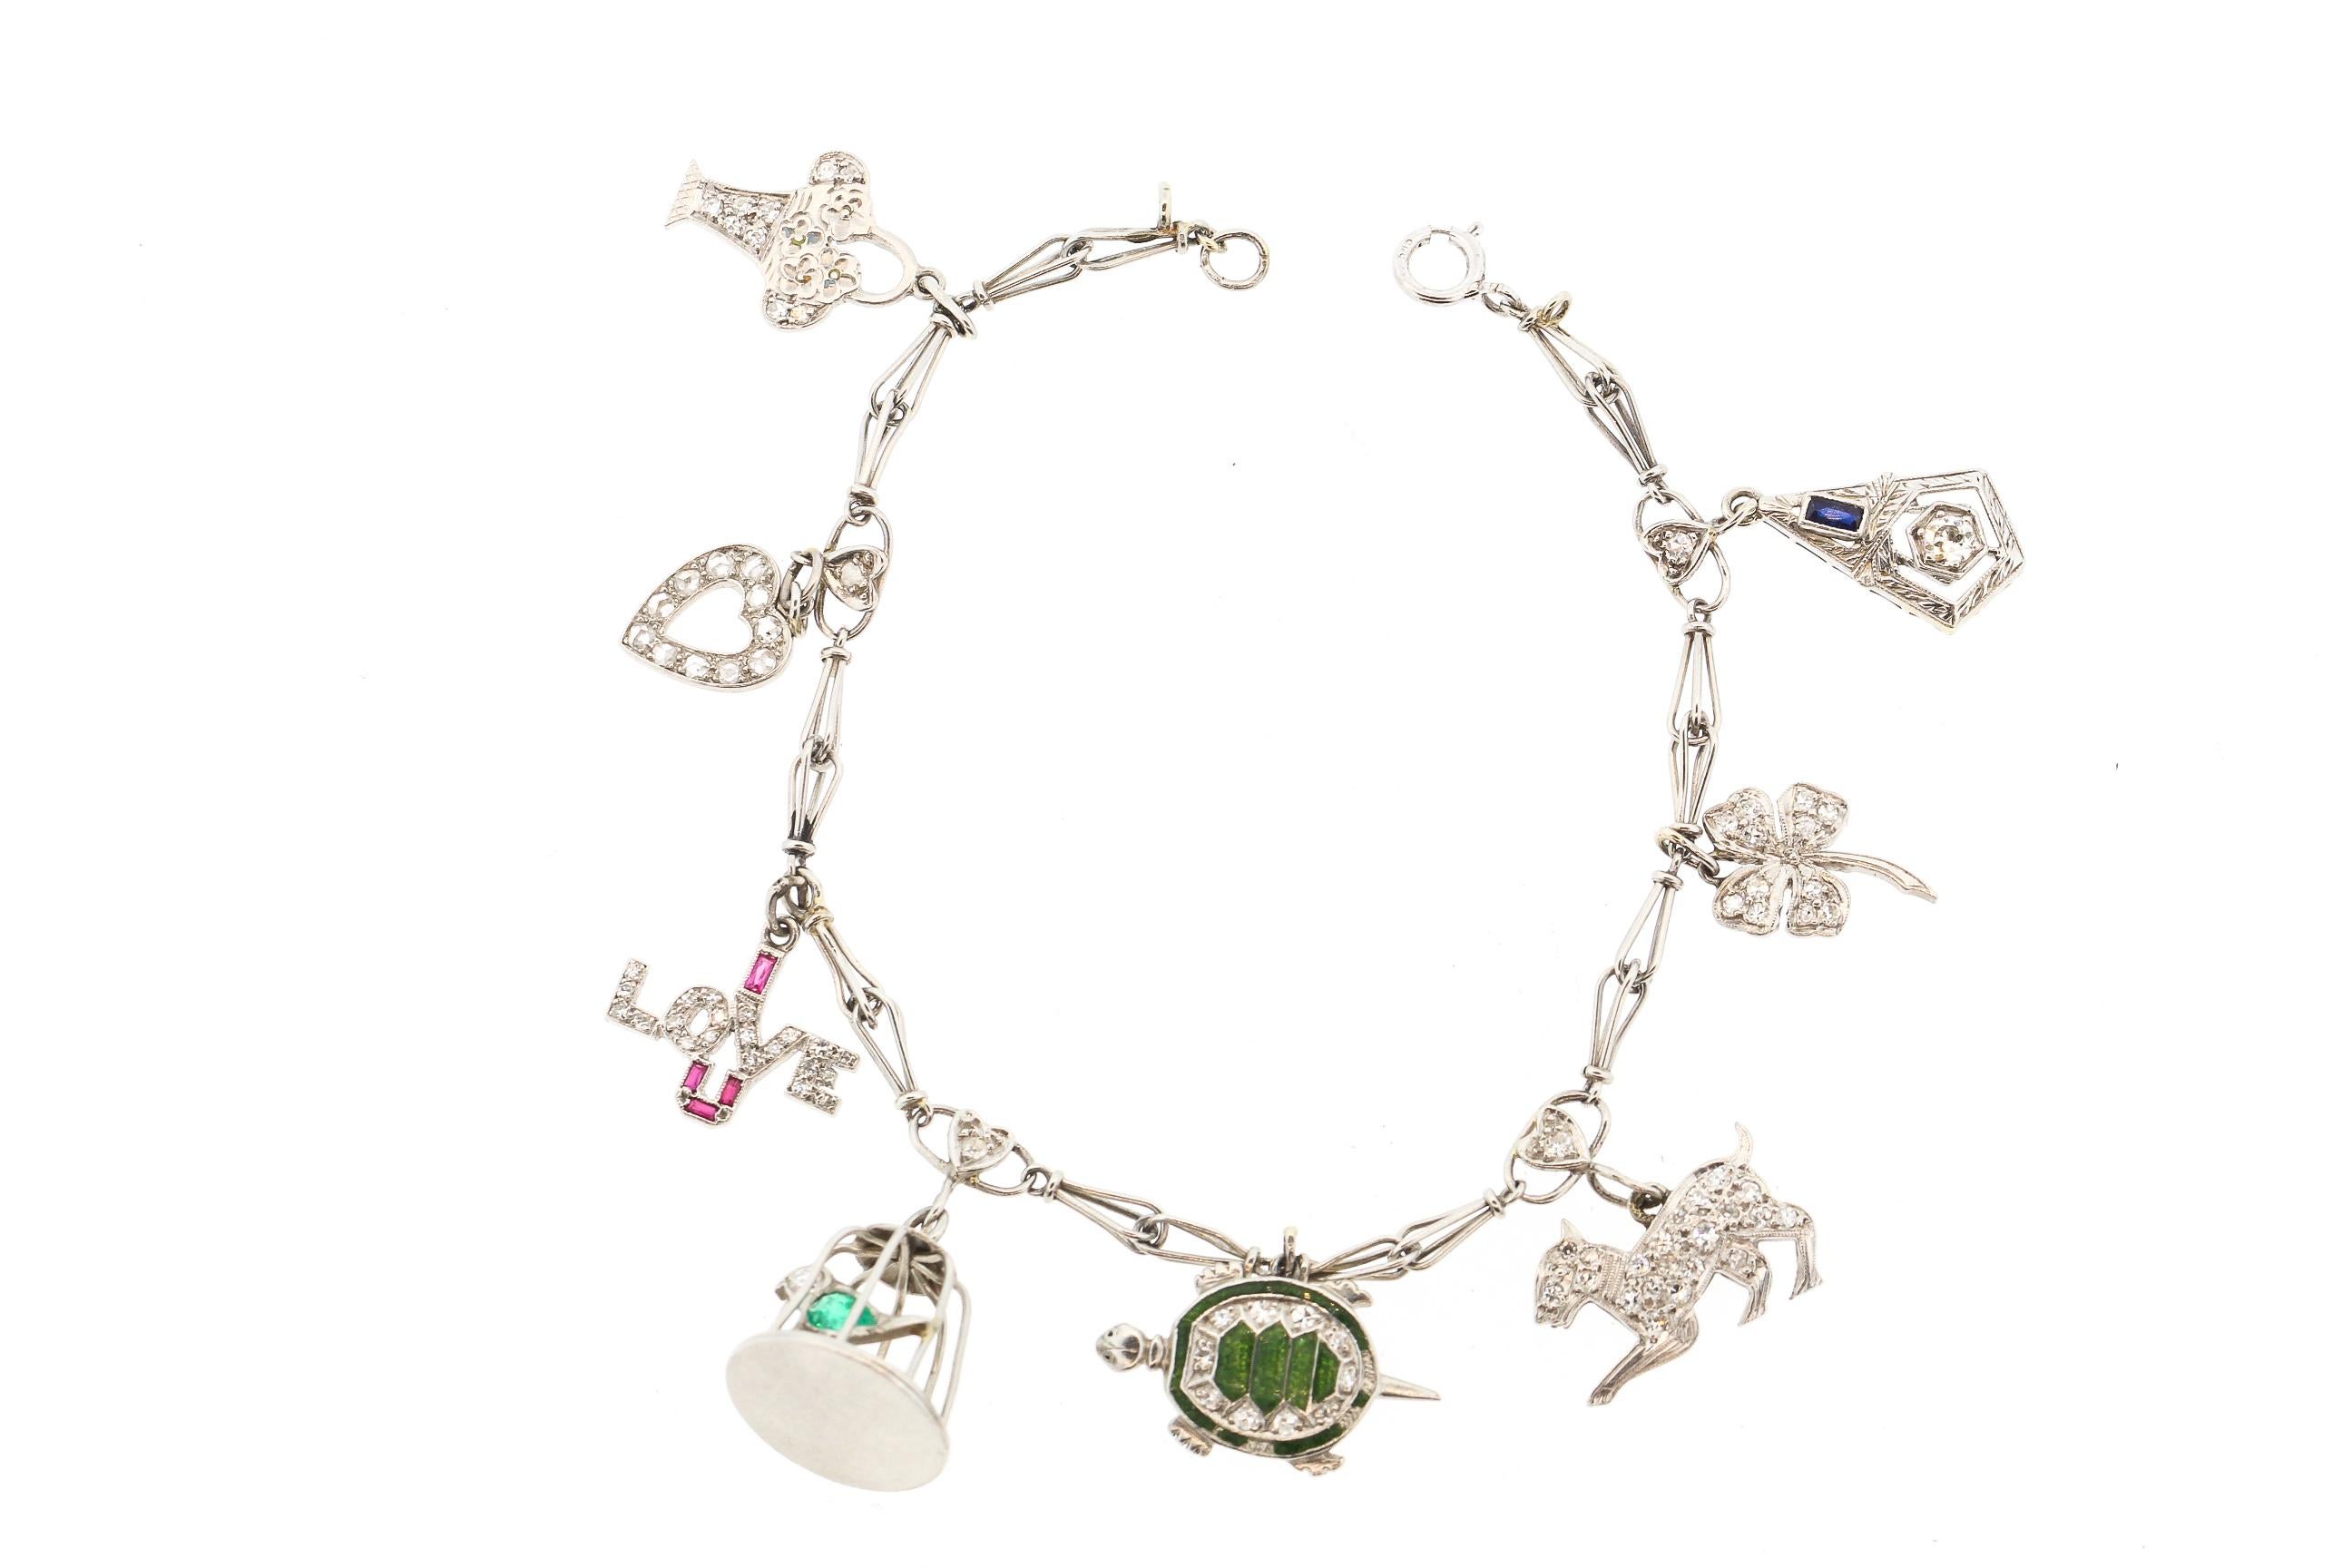 Antique platinum and gems charm bracelet circa 1935. The charms are of matching scale and make to create a lovely filled charm bracelet. The charms are a basket, a heart, an I LOVE U charm, a bird in a cage, a turtle, a dog, a clover and a small